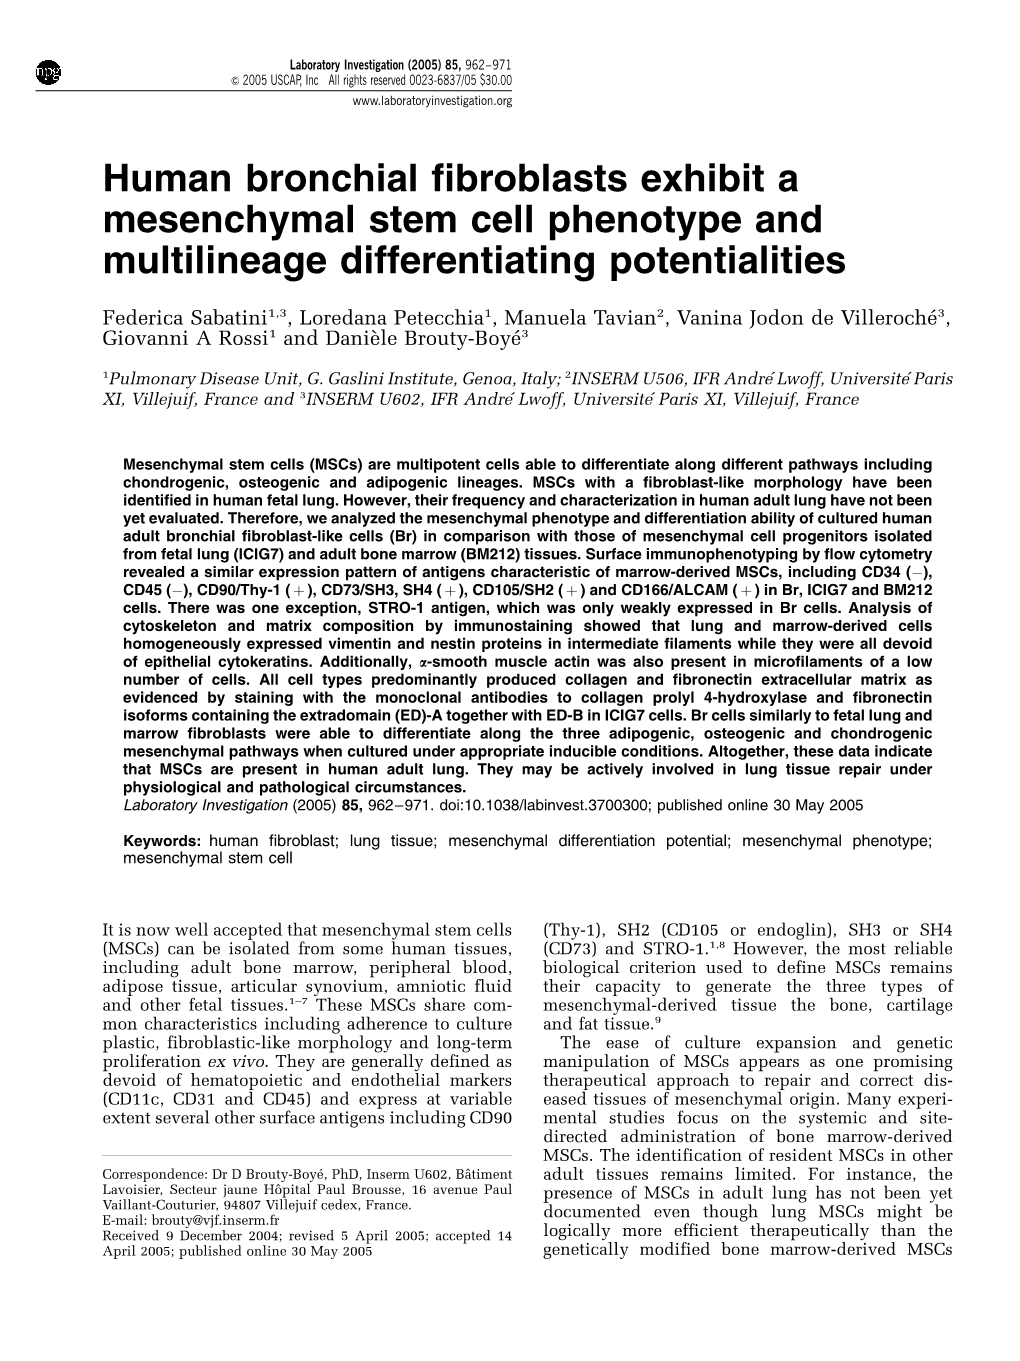 Human Bronchial Fibroblasts Exhibit a Mesenchymal Stem Cell Phenotype and Multilineage Differentiating Potentialities